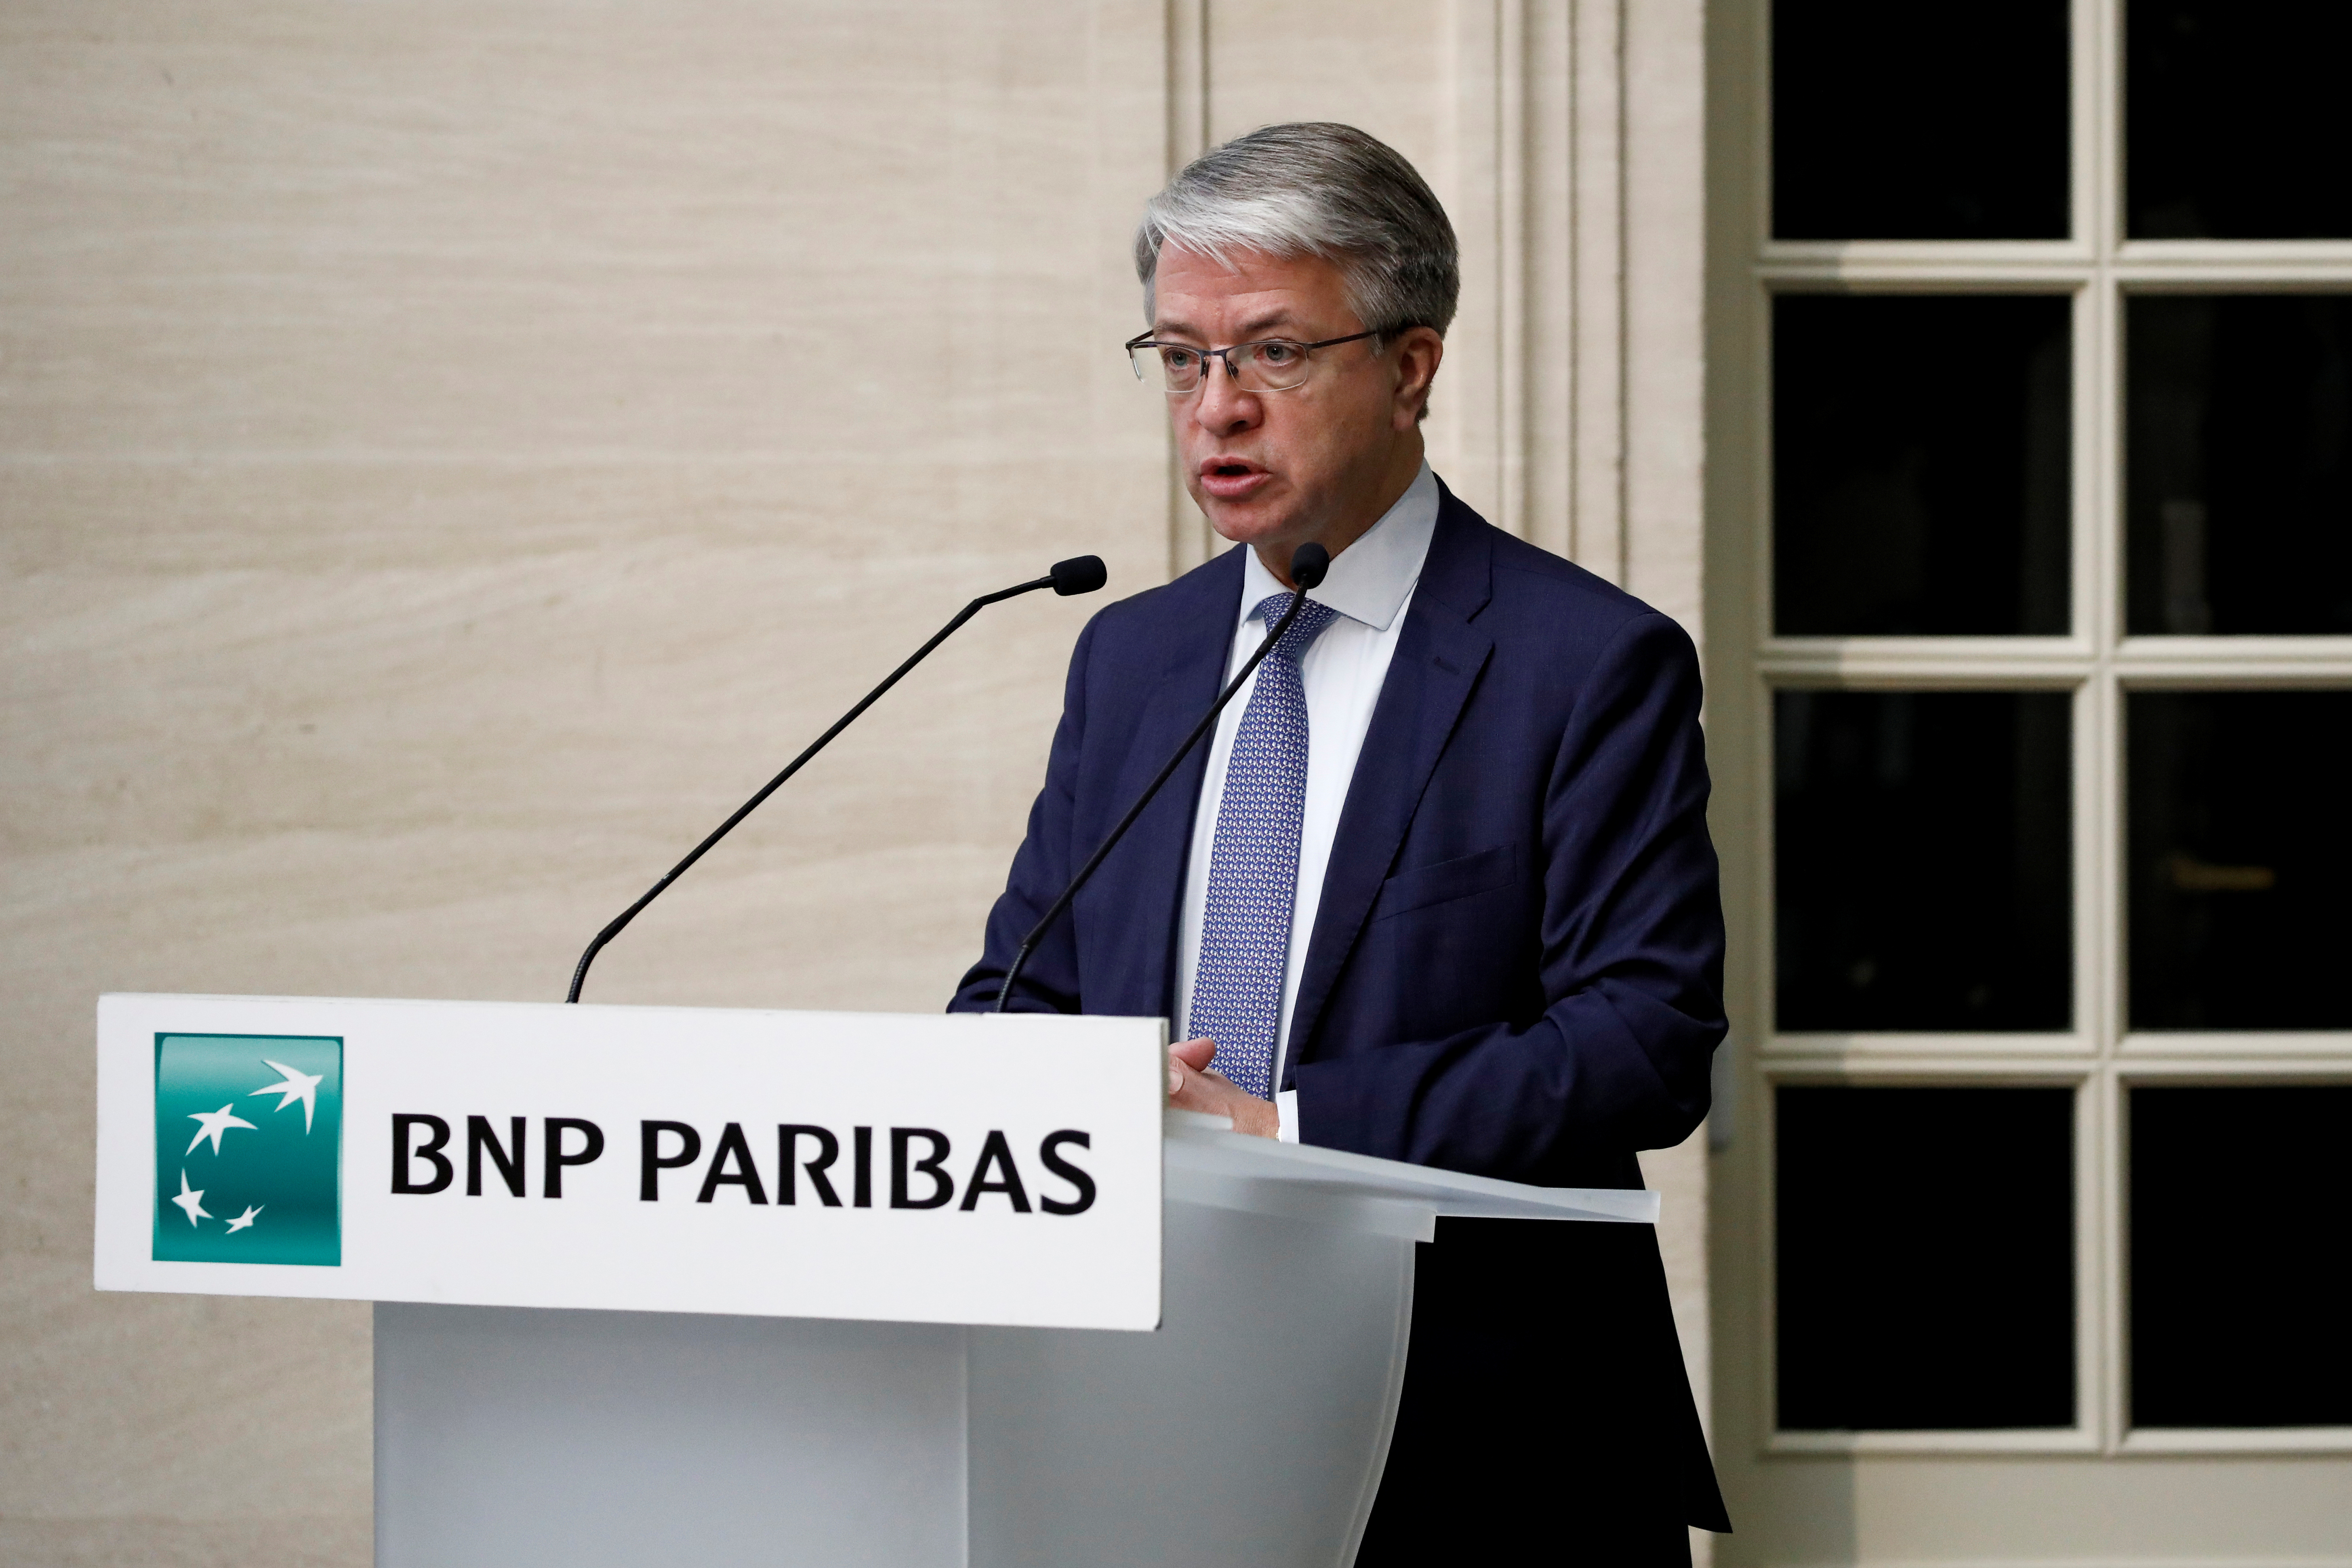 BNP Paribas annual results news conference in Paris